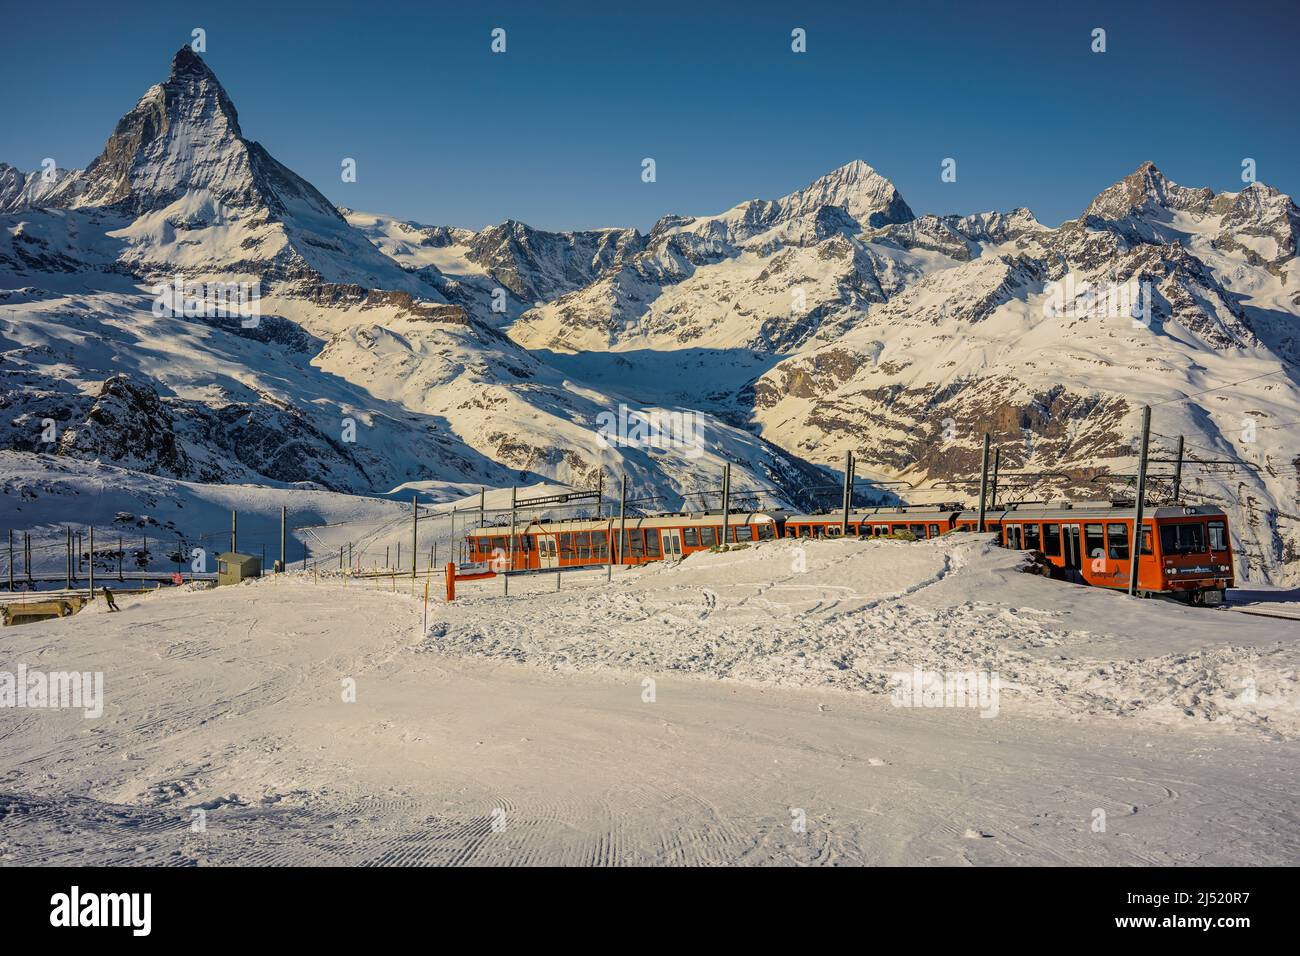 Mountain train in the Swiss Alps with Matterhorn  in the background Stock Photo